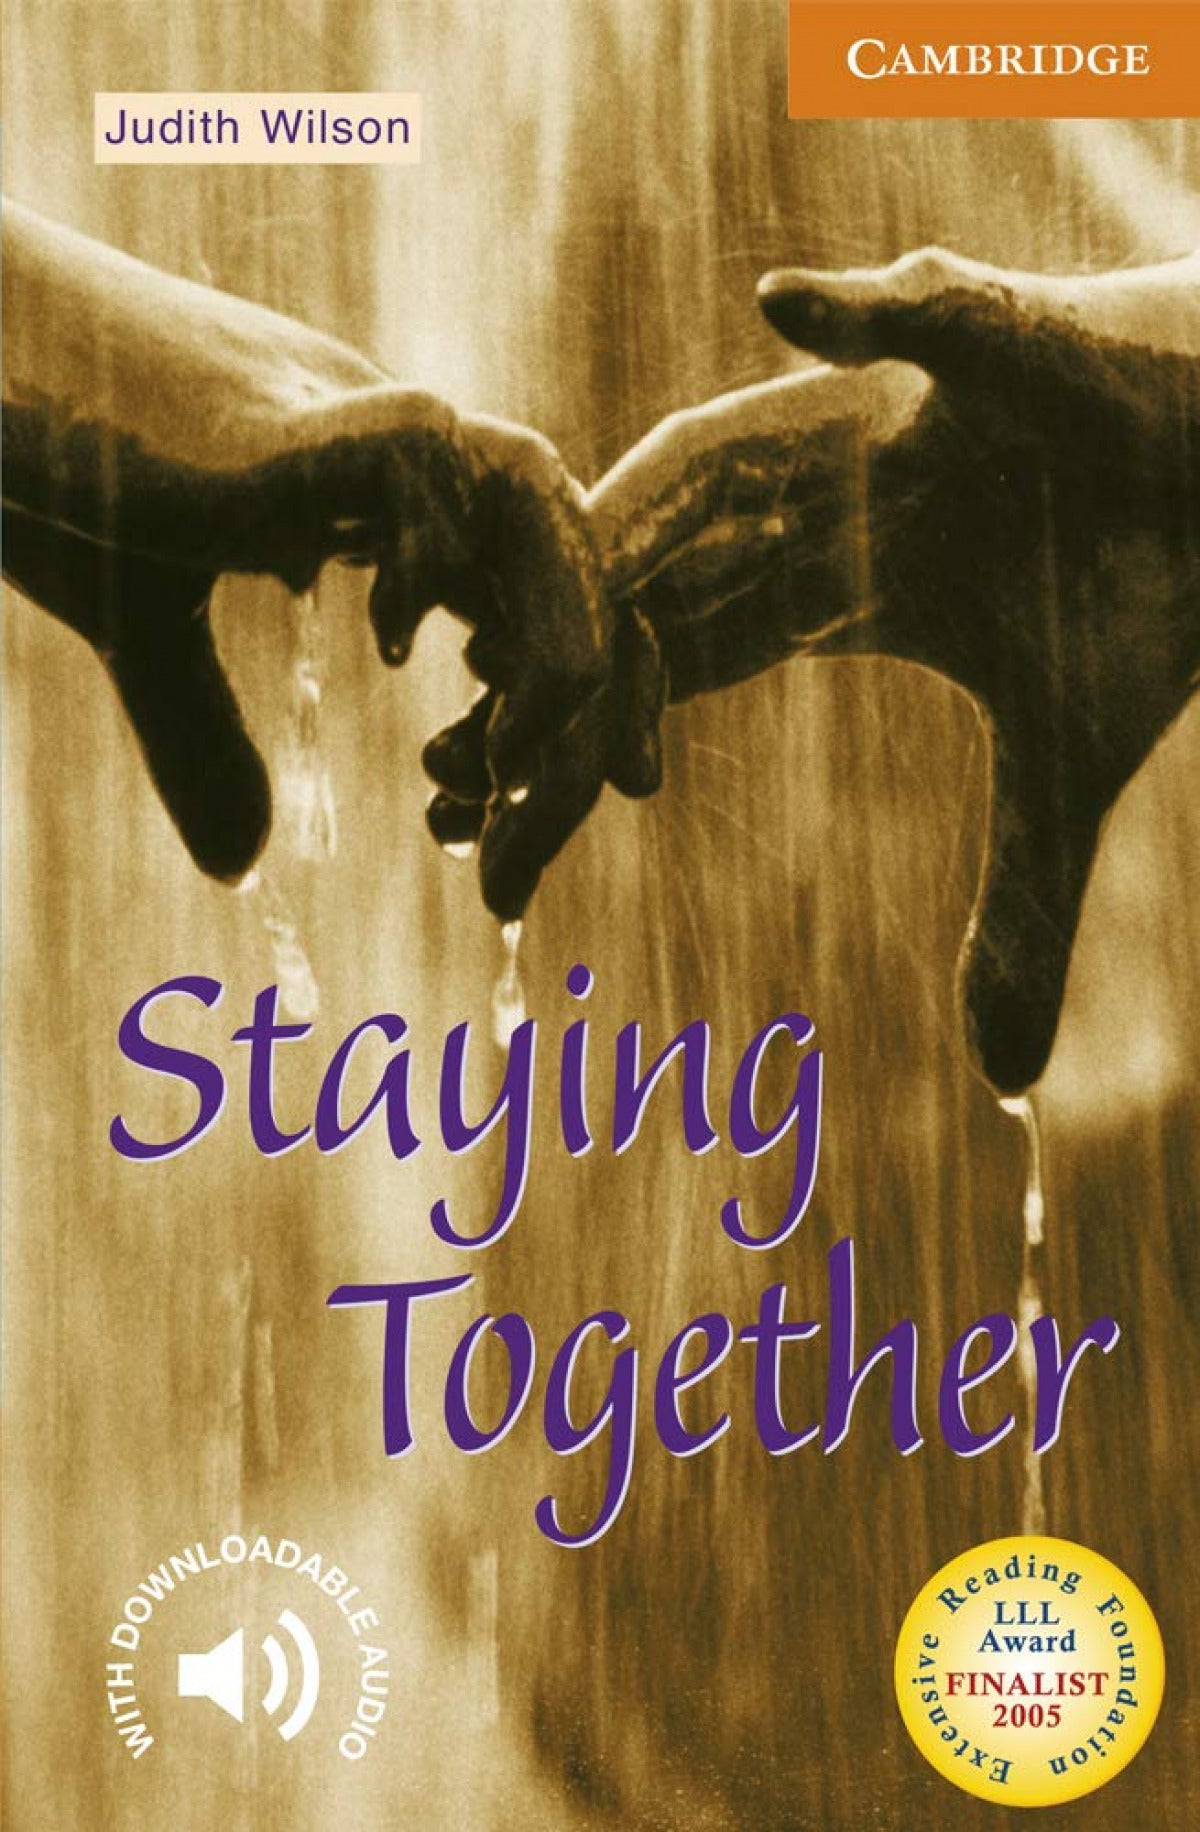  Staying together 